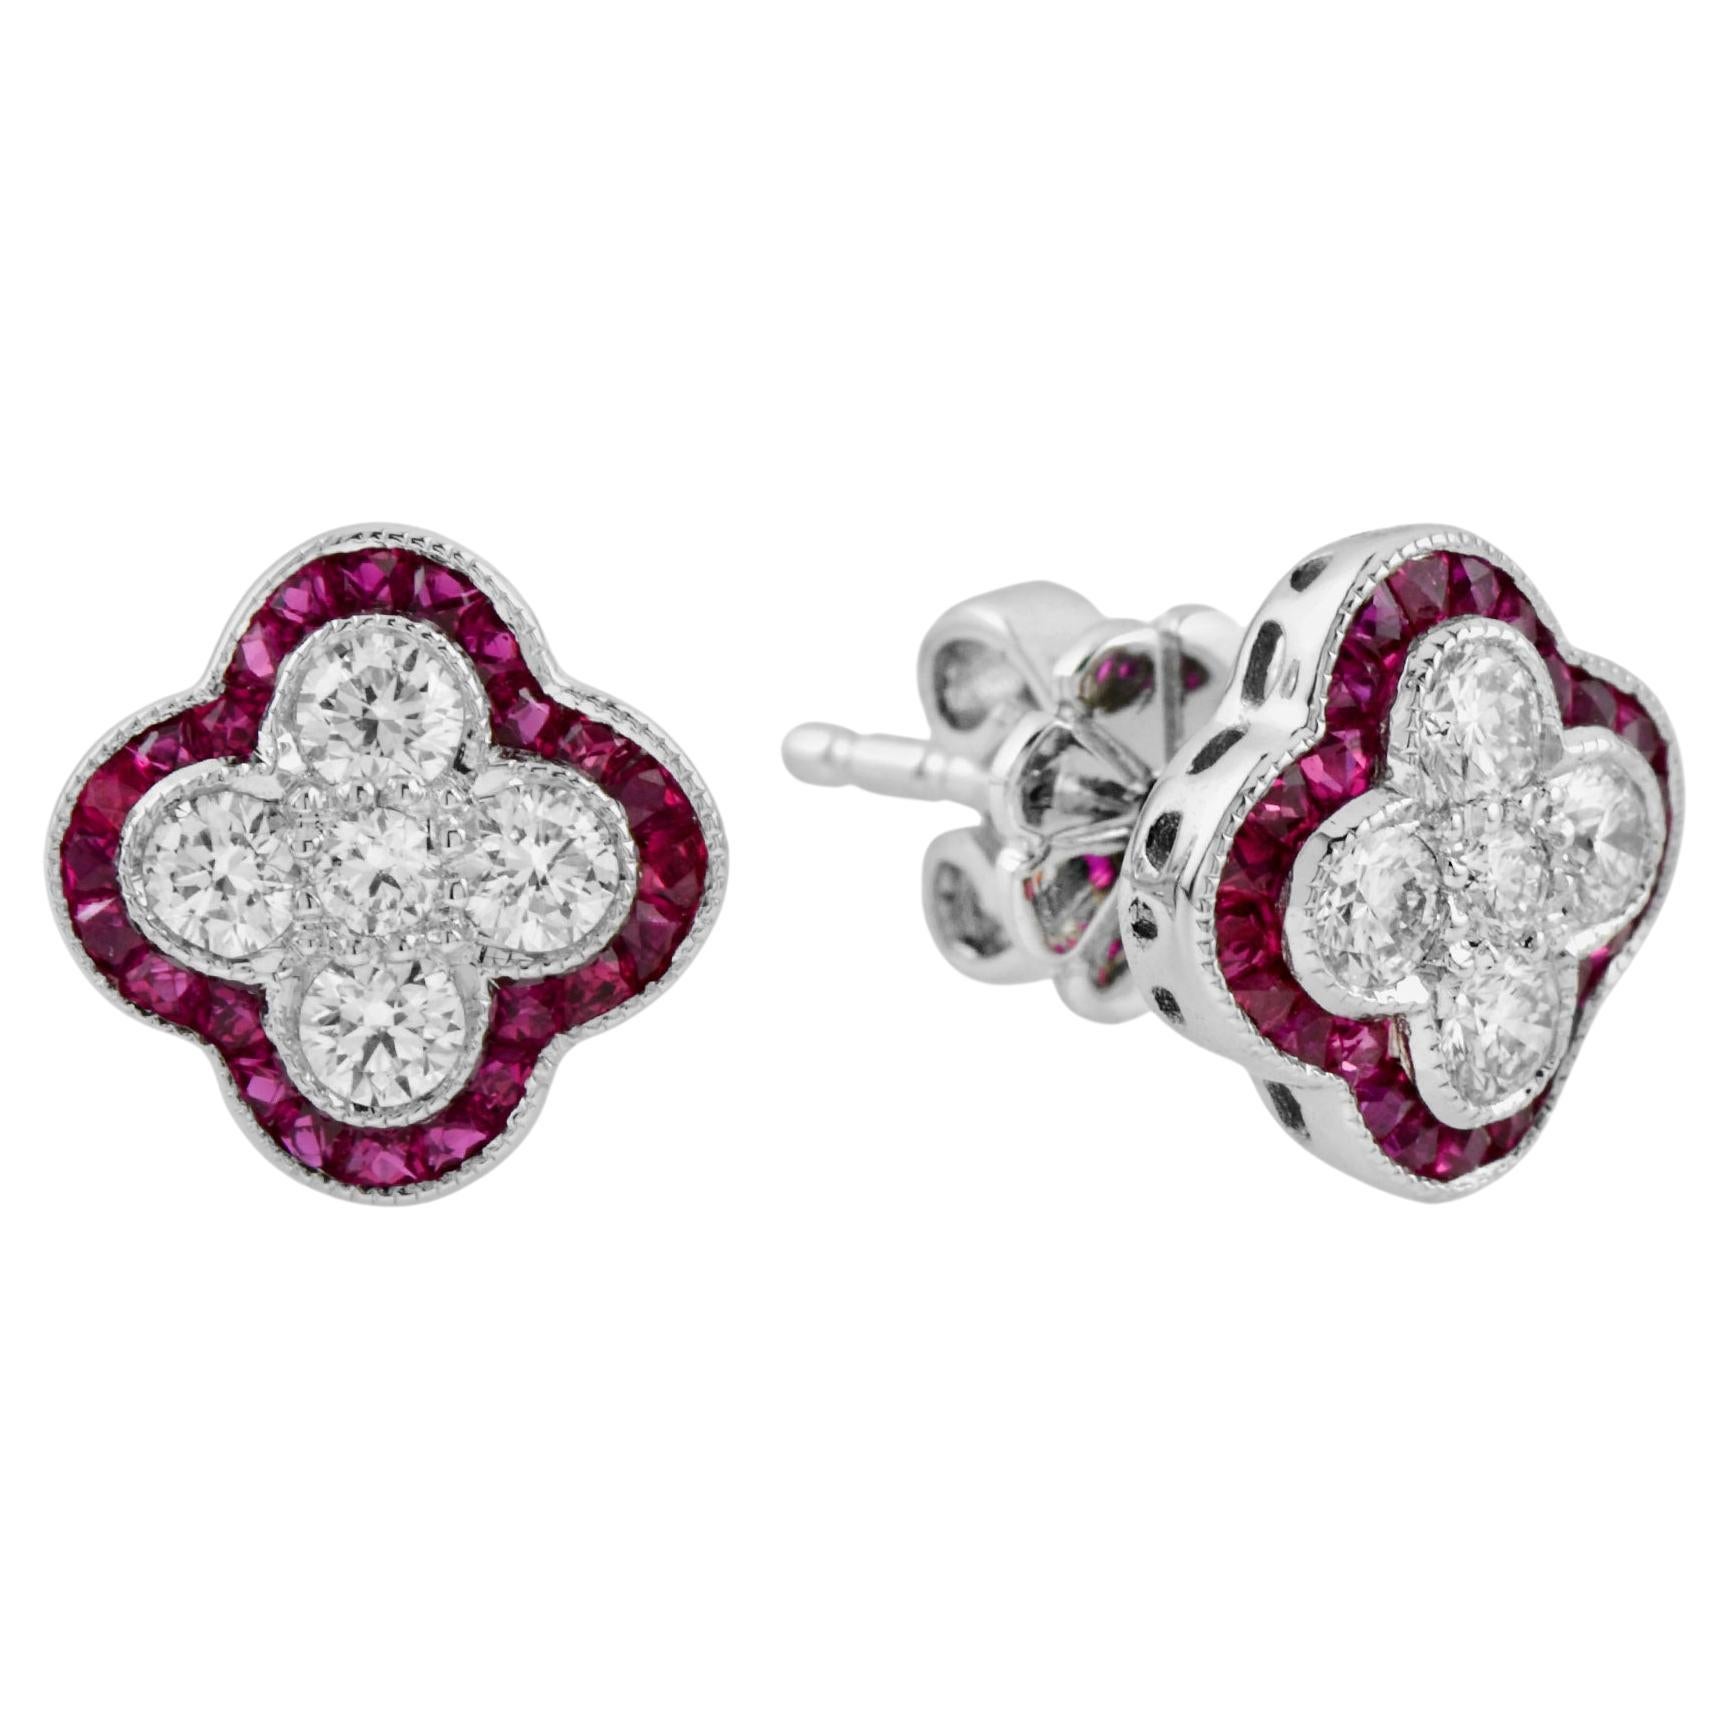 Diamond and Ruby Art Deco Style Floral Cluster Stud Earrings in 14K White Gold 